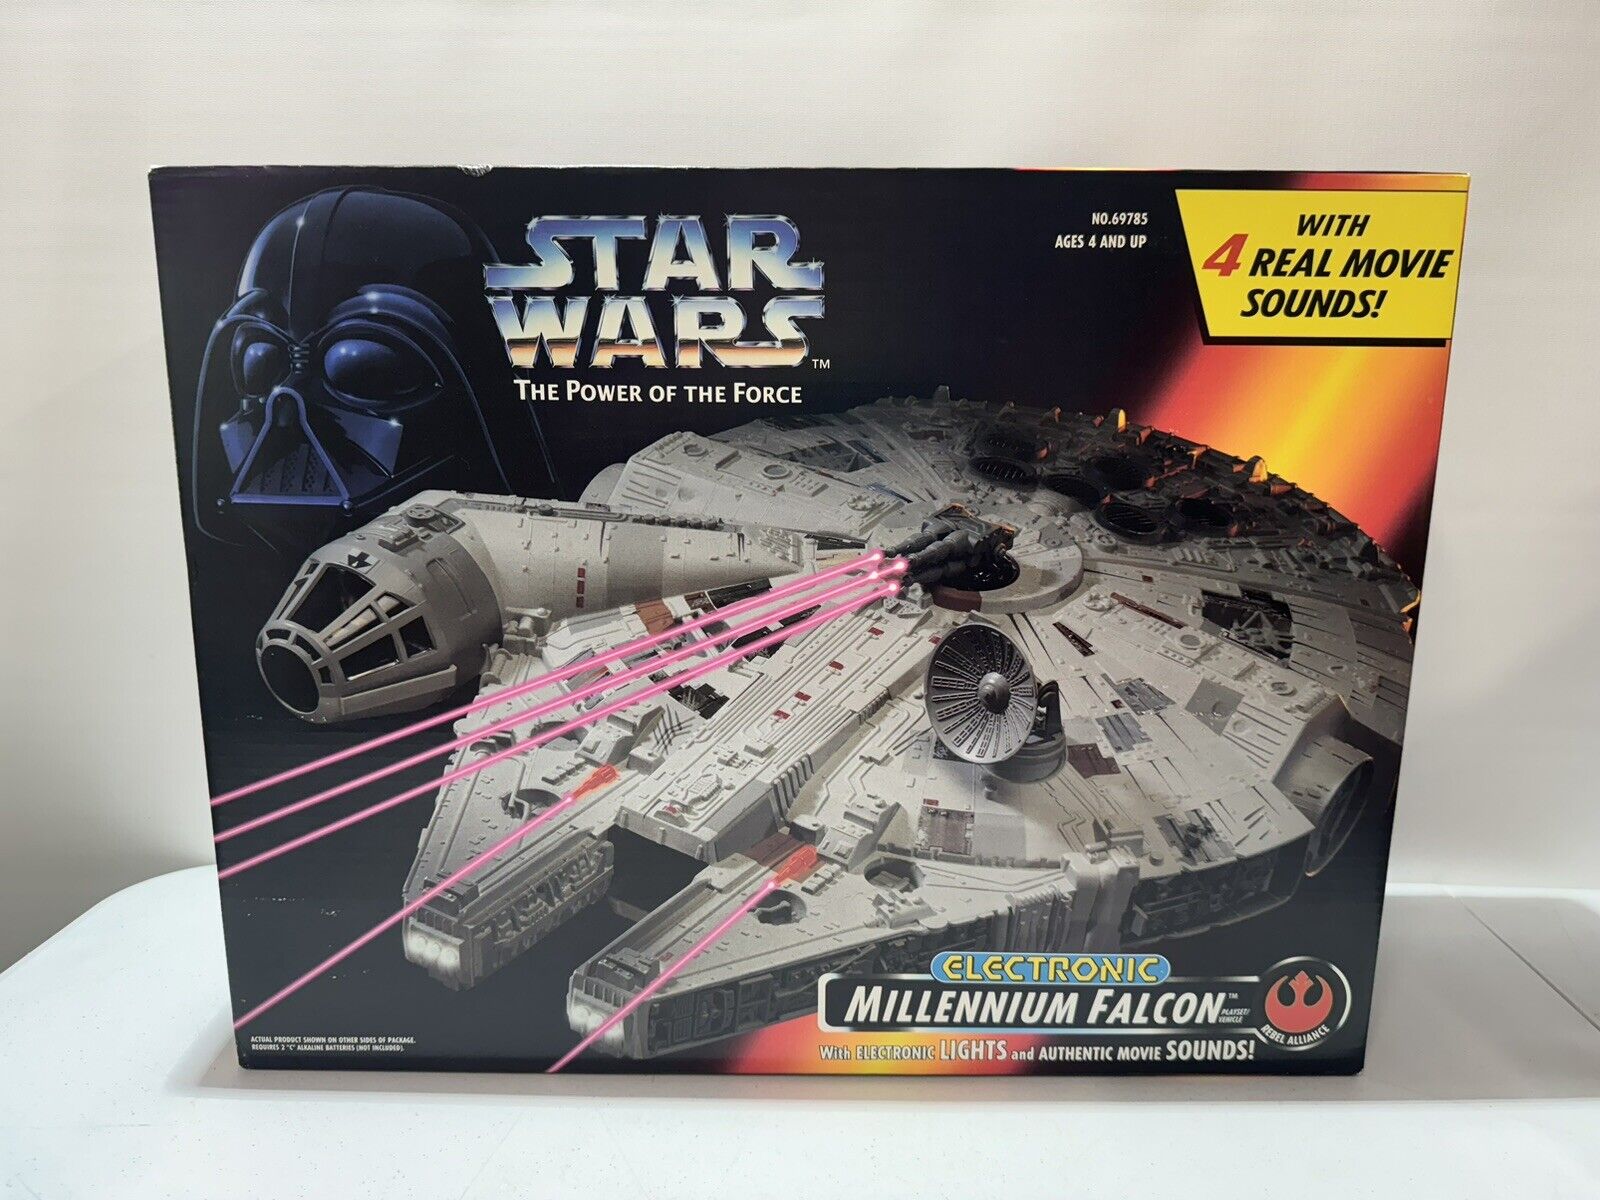 1995 Kenner Star Wars The Power of The Force Electronic Millennium Falcon-Sealed